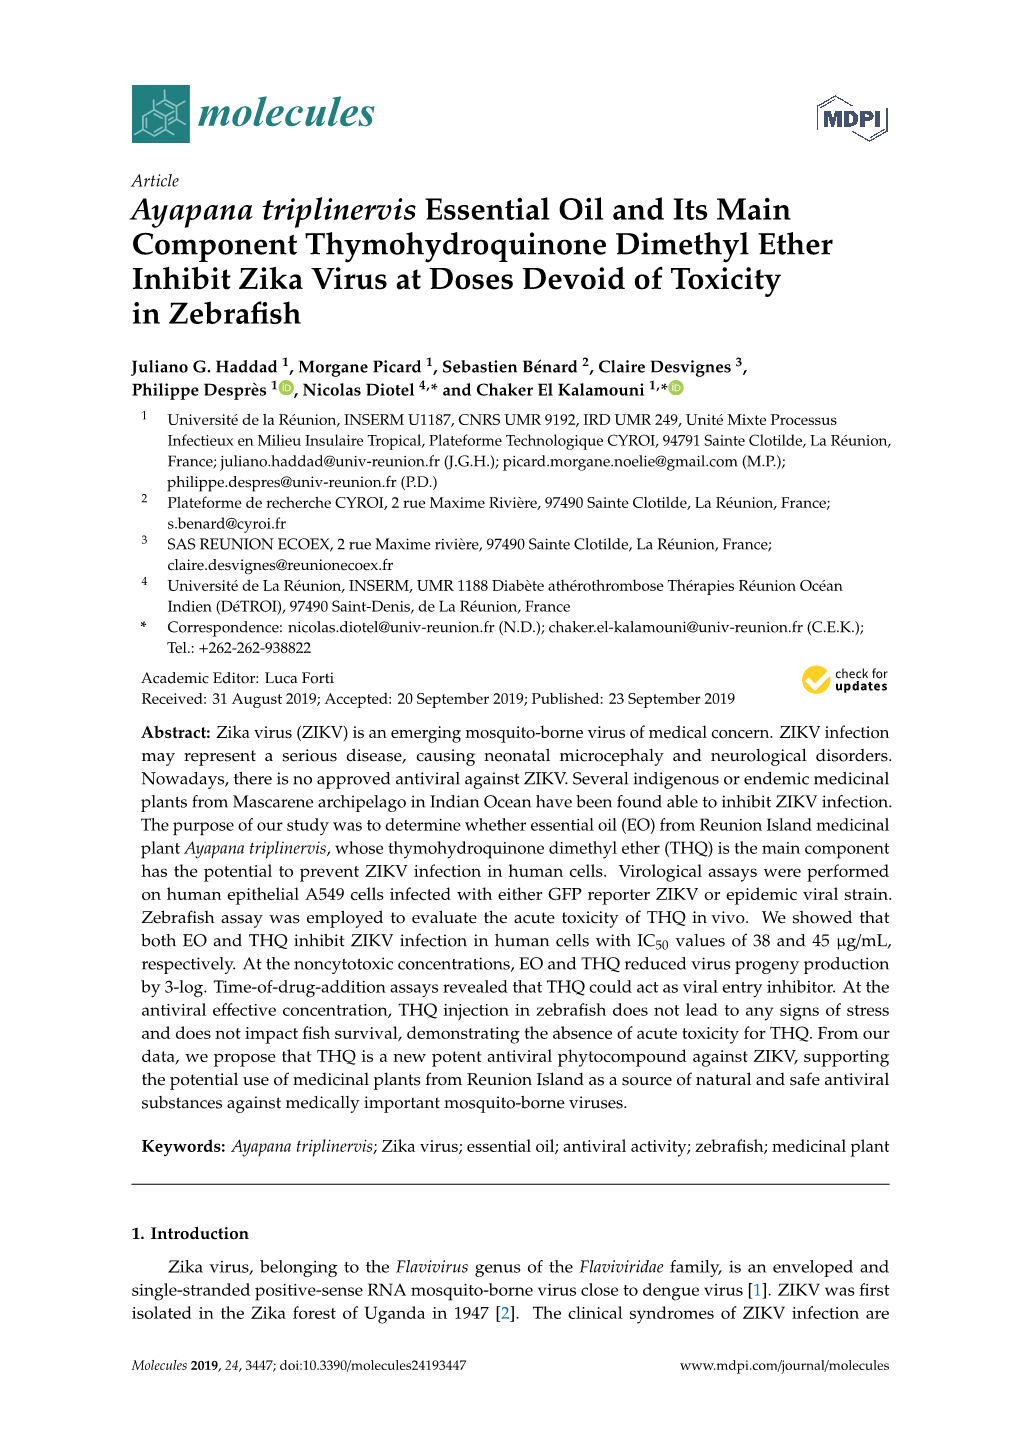 Ayapana Triplinervis Essential Oil and Its Main Component Thymohydroquinone Dimethyl Ether Inhibit Zika Virus at Doses Devoid of Toxicity in Zebraﬁsh